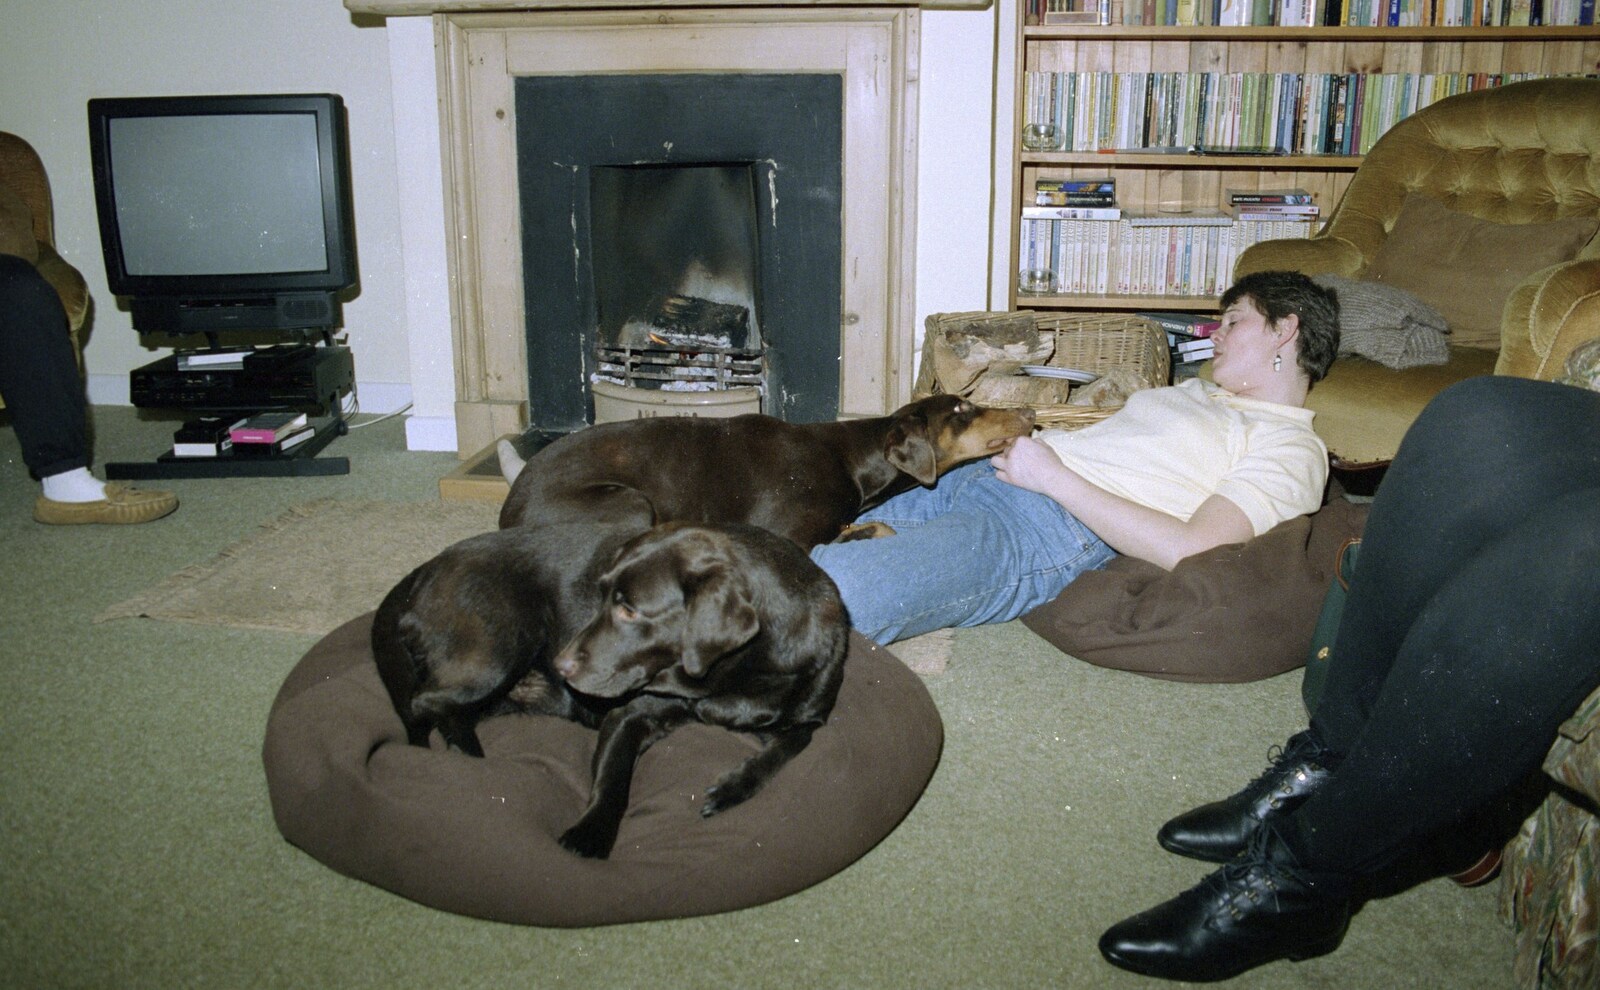 Back in Suffolk, Pippa has a doze from Christmas Down South, Burton and Walkford, Dorset - 25th December 1994